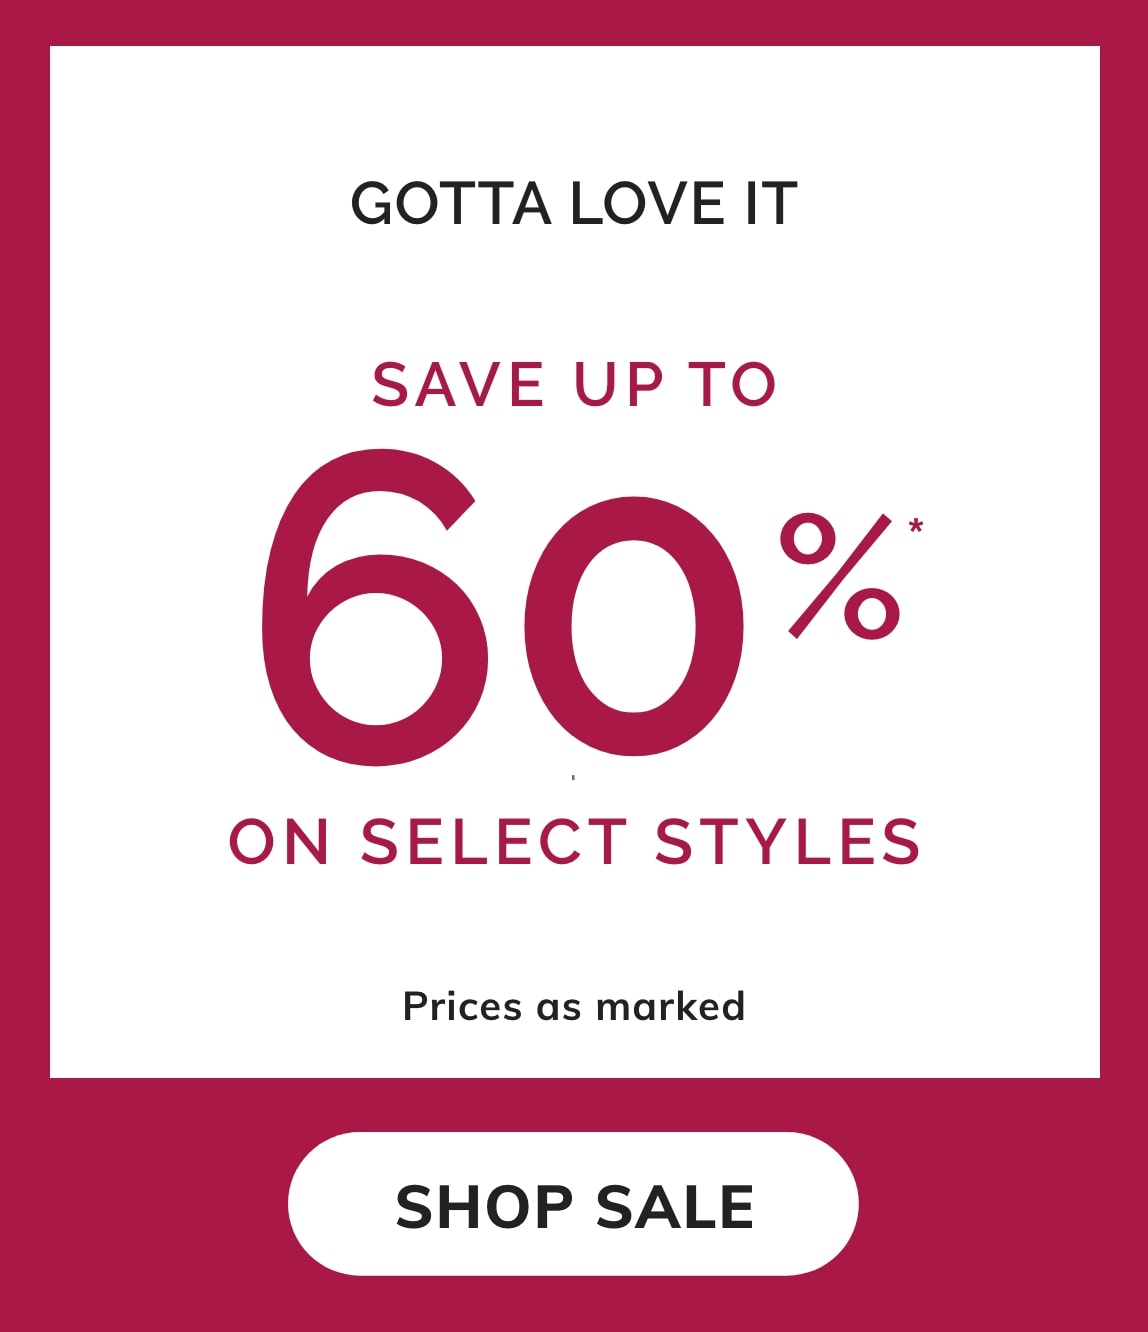 SAVE UP TO 60% ON SELECT STYLES.